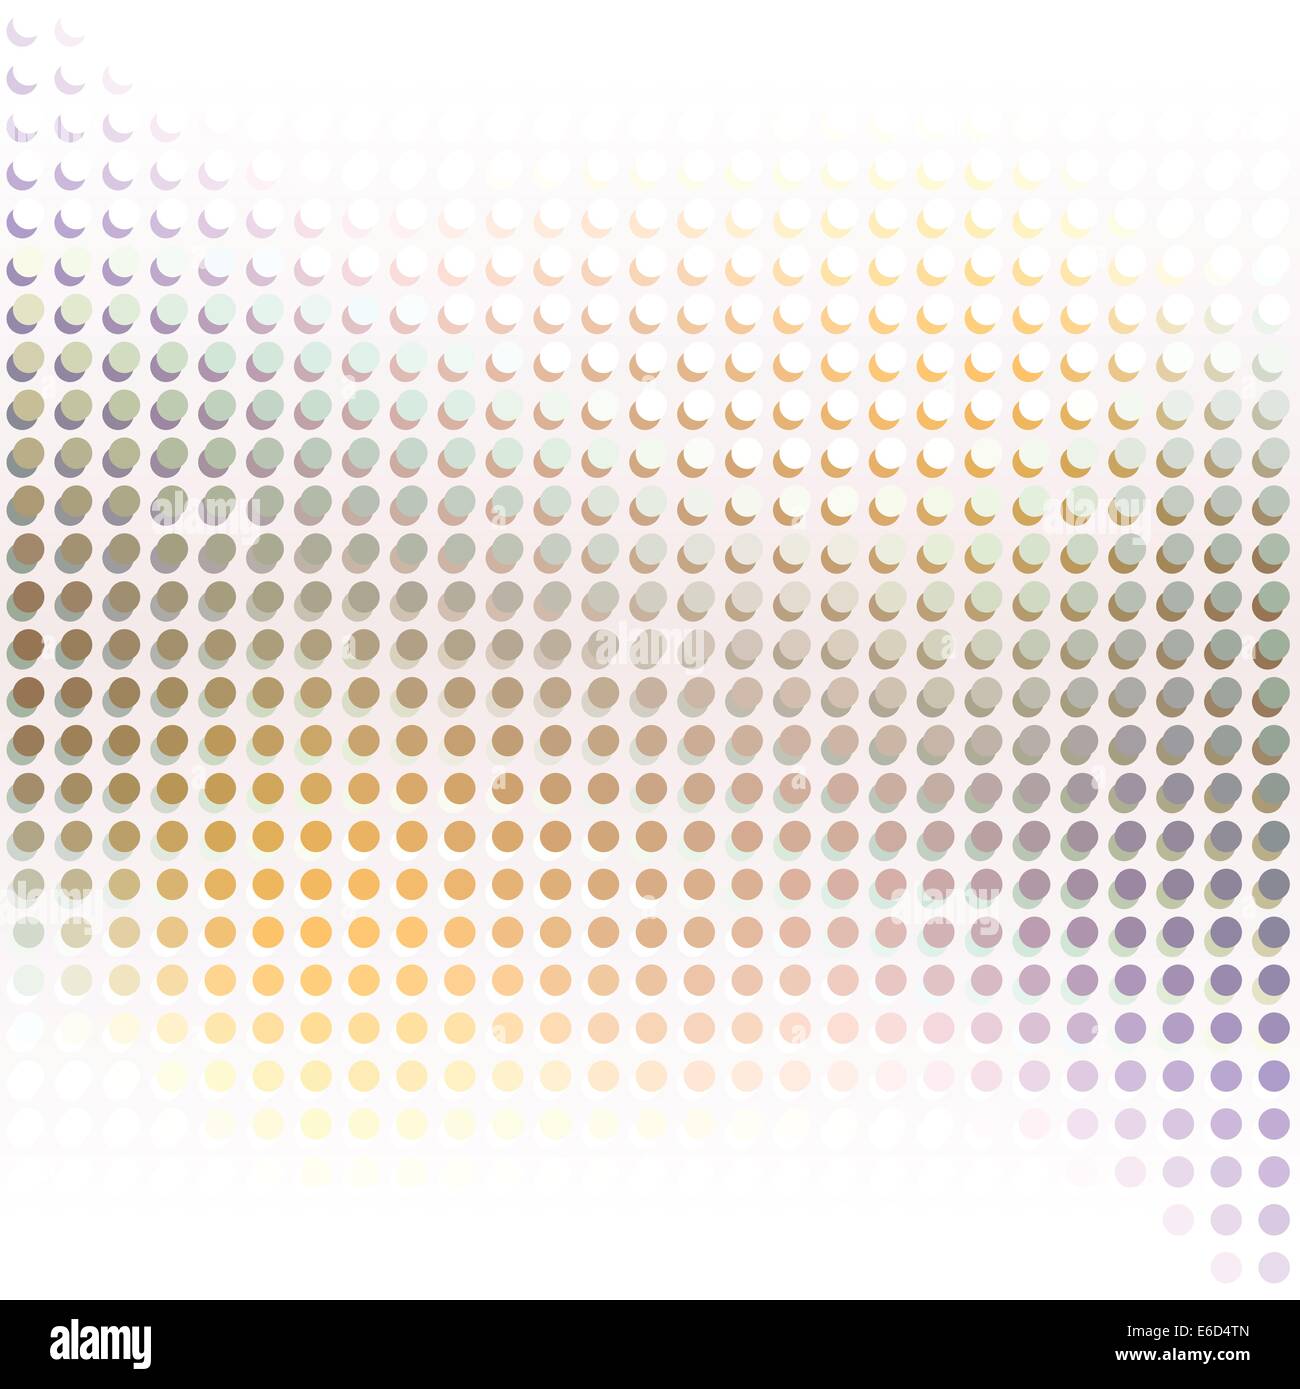 Abstract editable vector background of a dot pattern Stock Vector